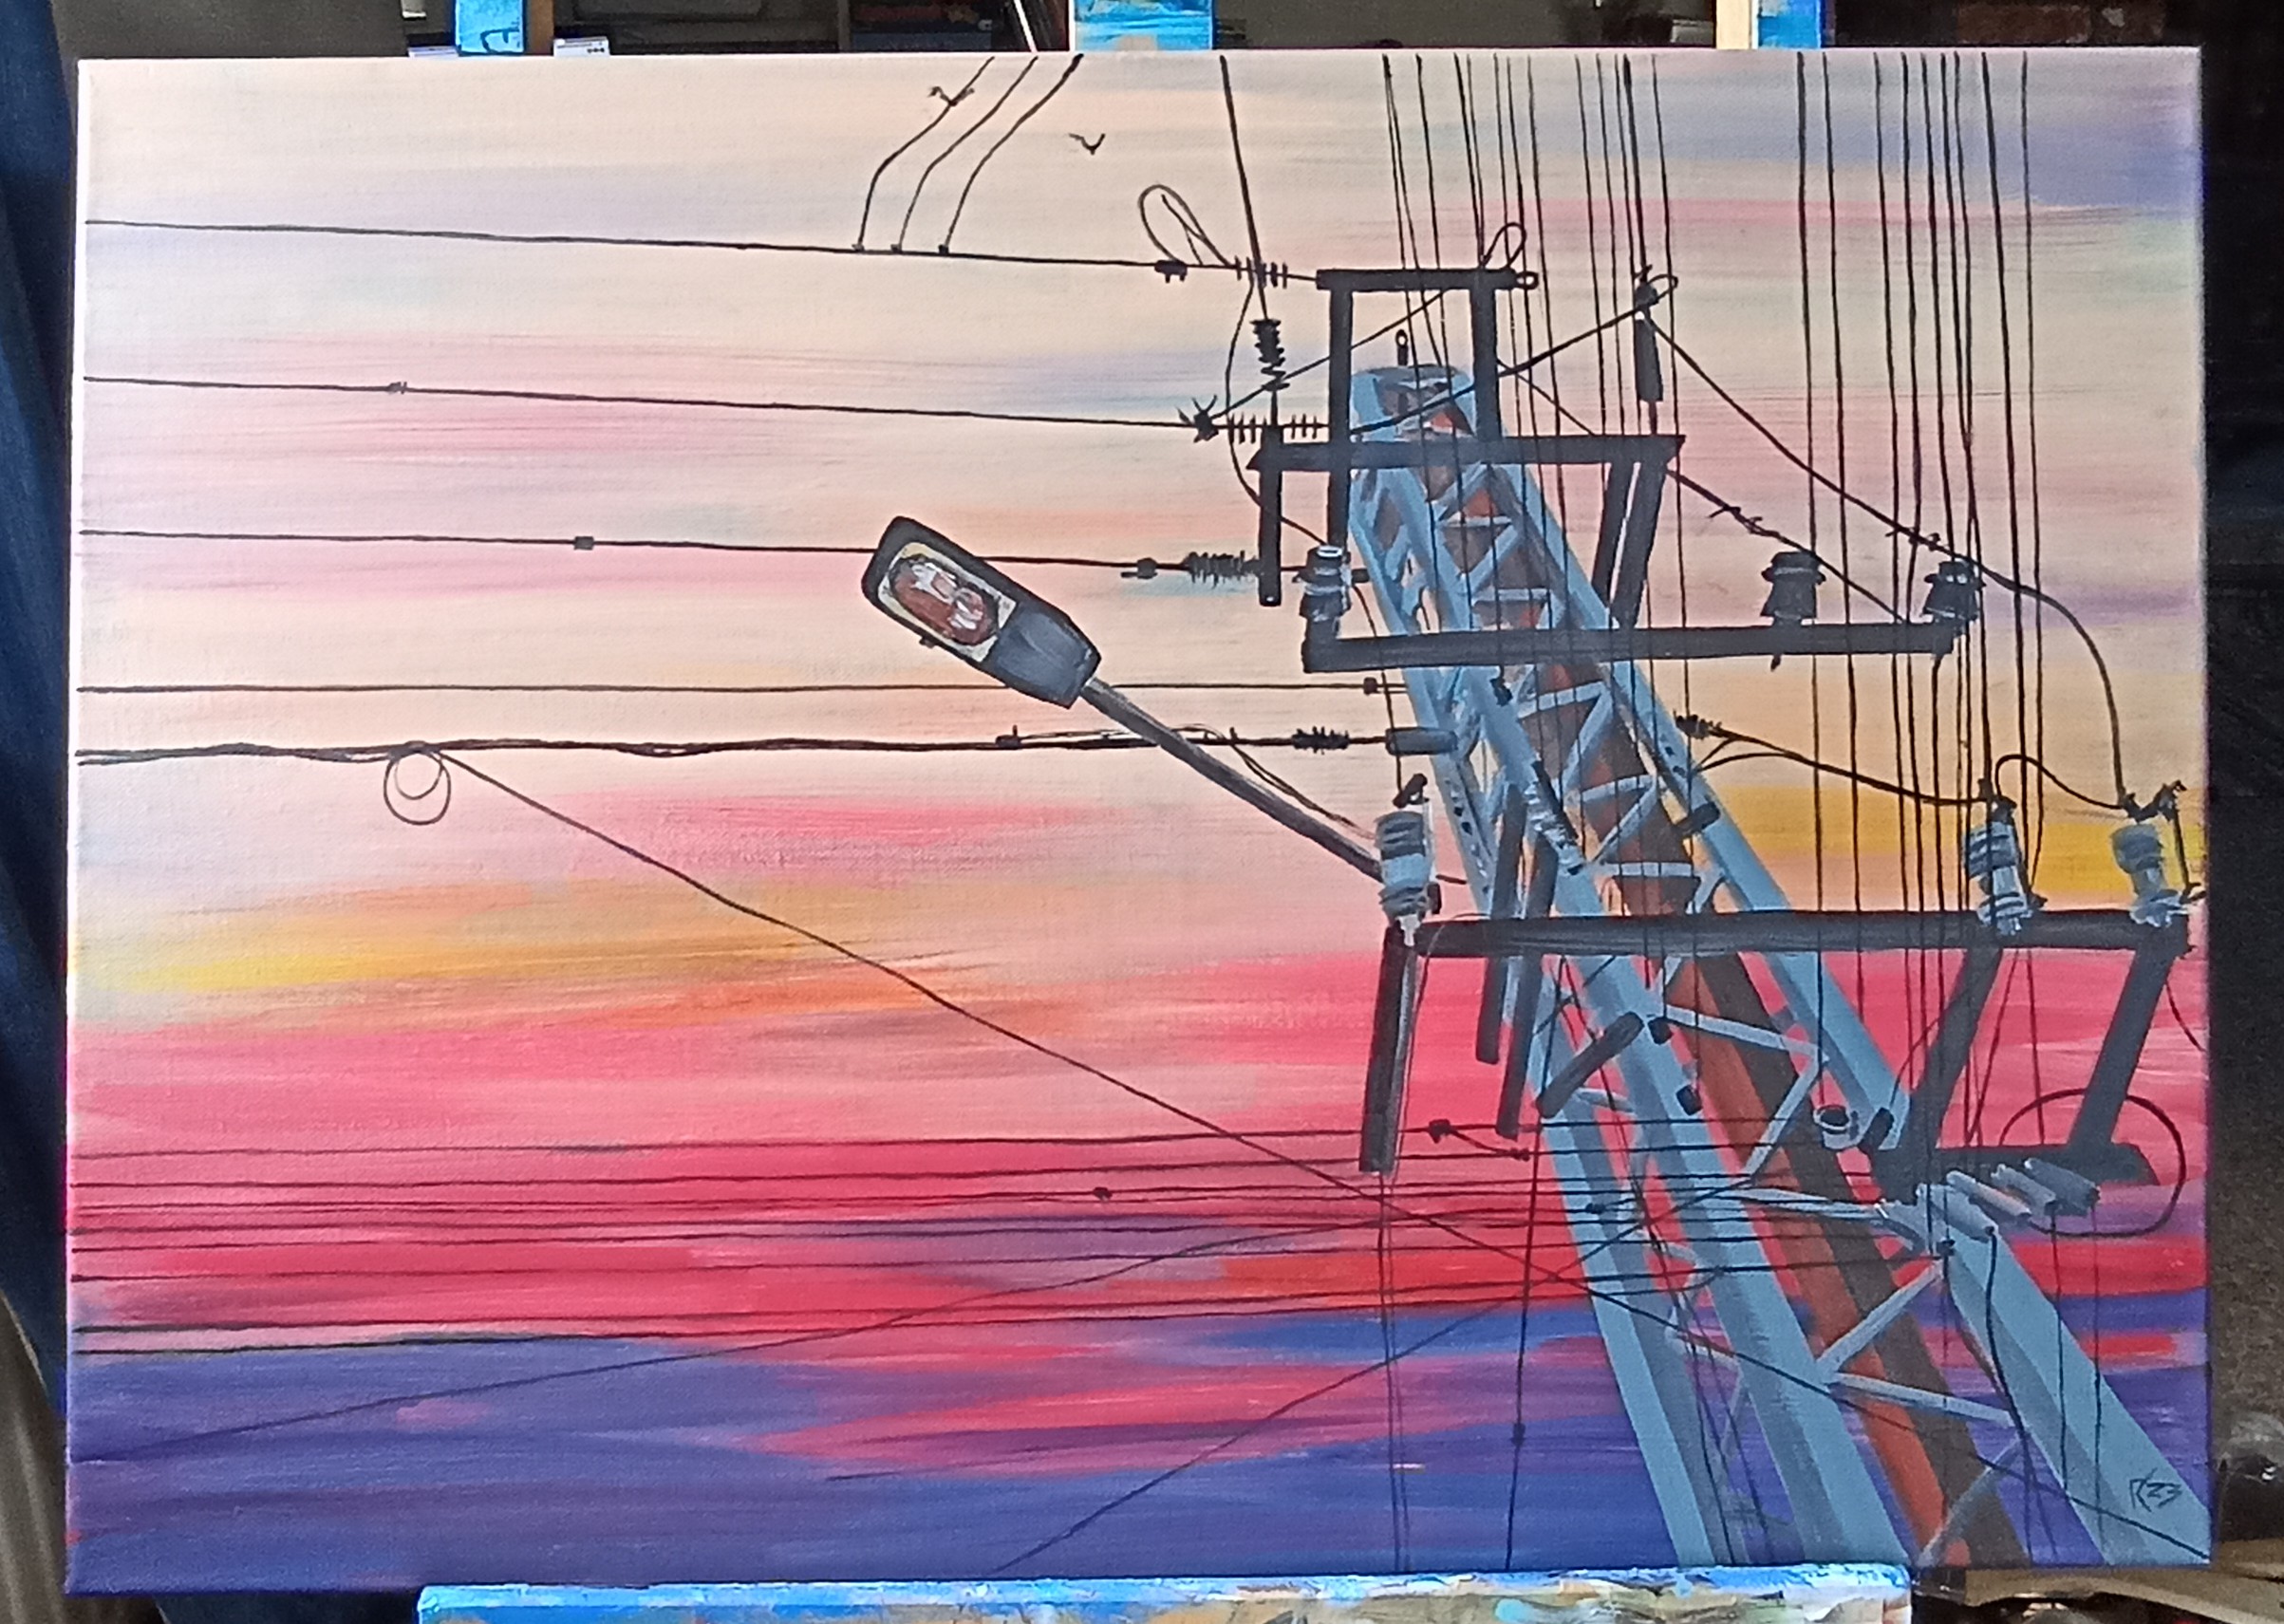 Electrical pole painting